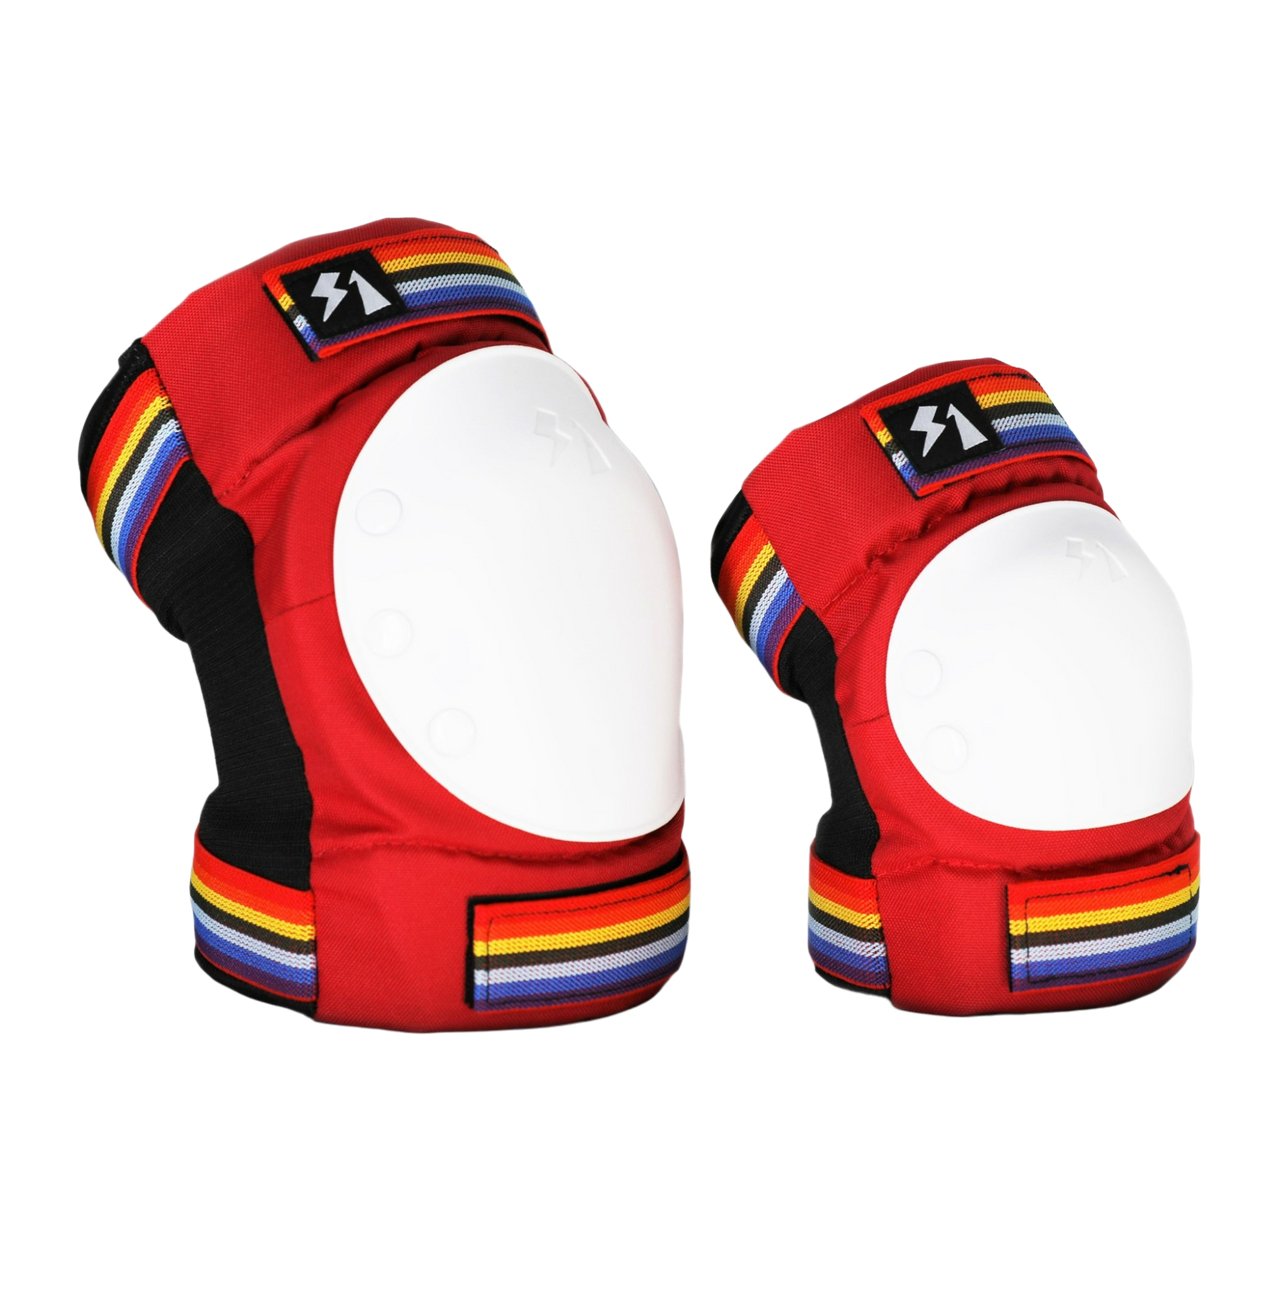 S1 - Park Knee & Elbow Pads Set | Adult Knee & Elbow Pads from S-One - Soul Performance Surf & Skate - S-One